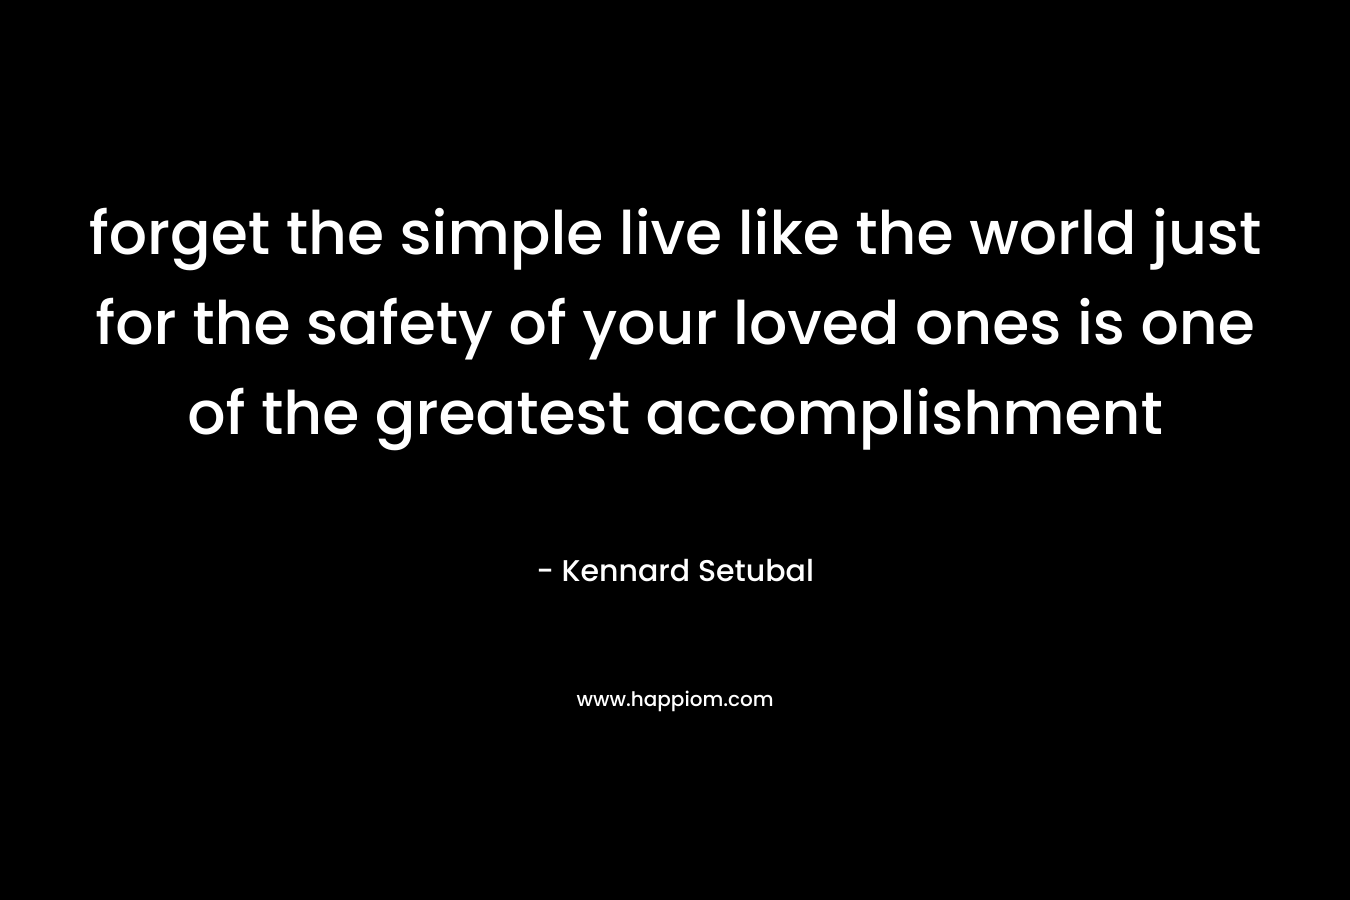 forget the simple live like the world just for the safety of your loved ones is one of the greatest accomplishment